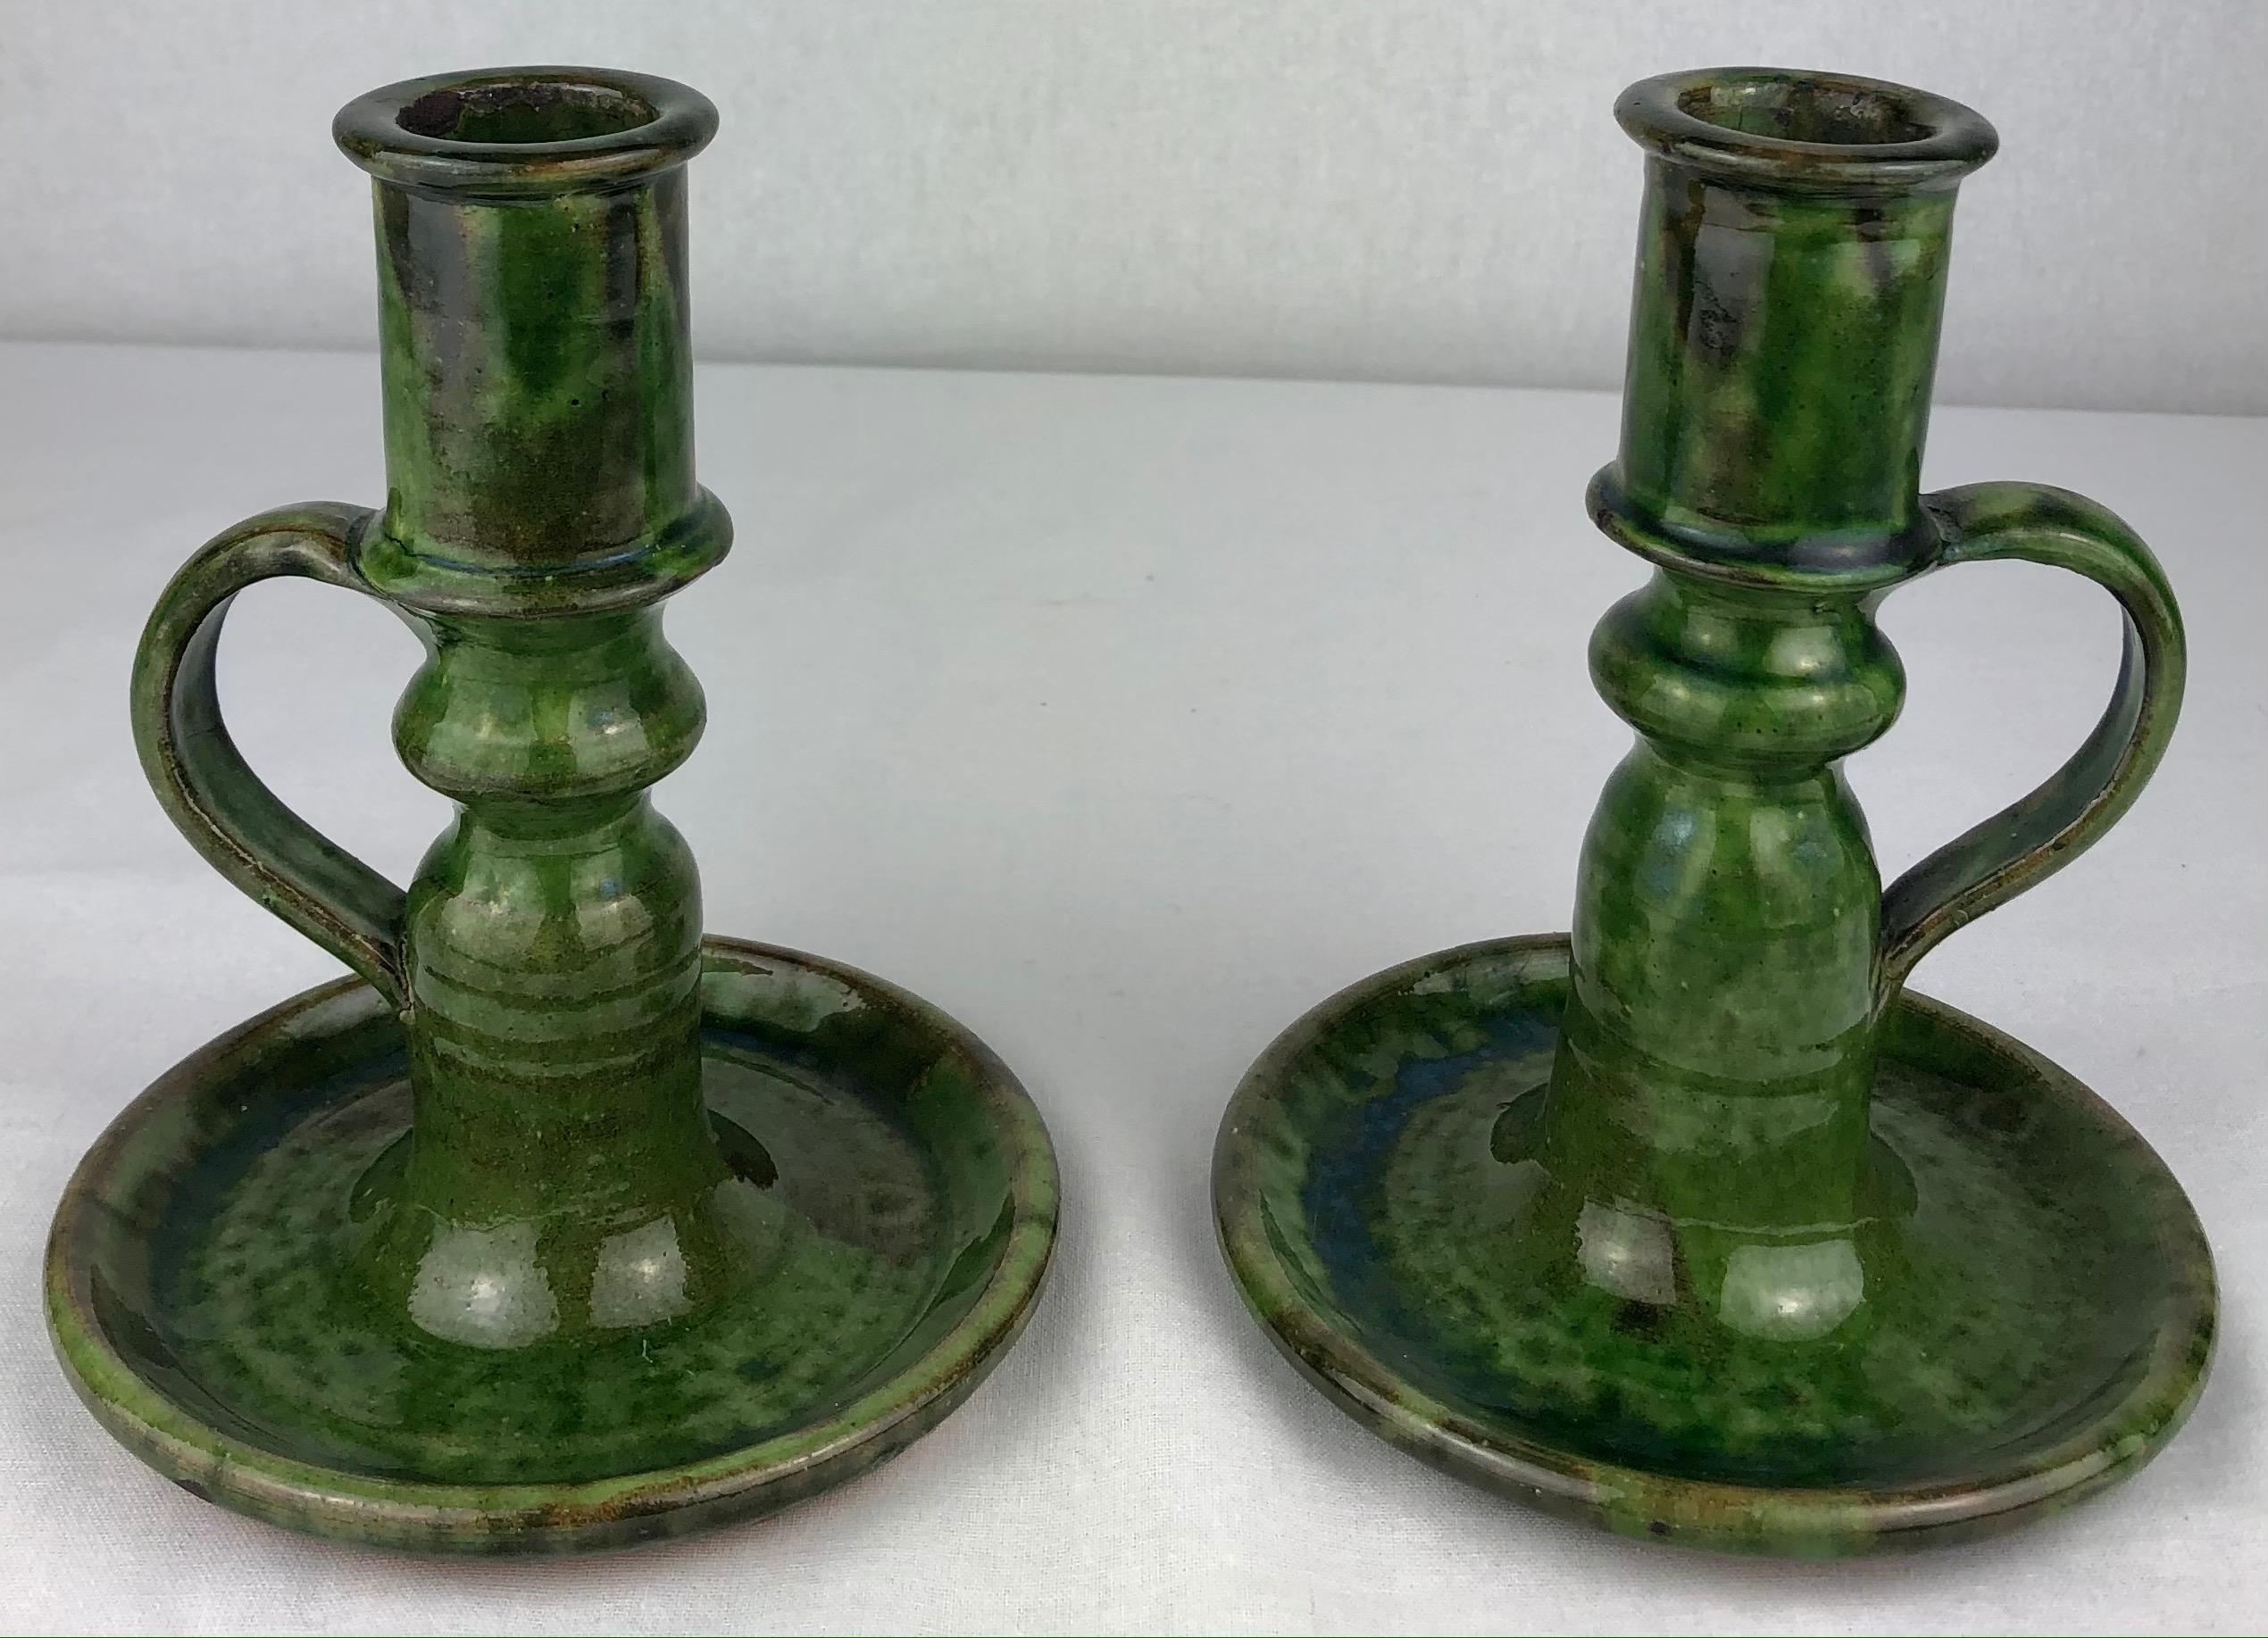 Glazed Pair of French Midcentury Ceramic Candleholders, Green